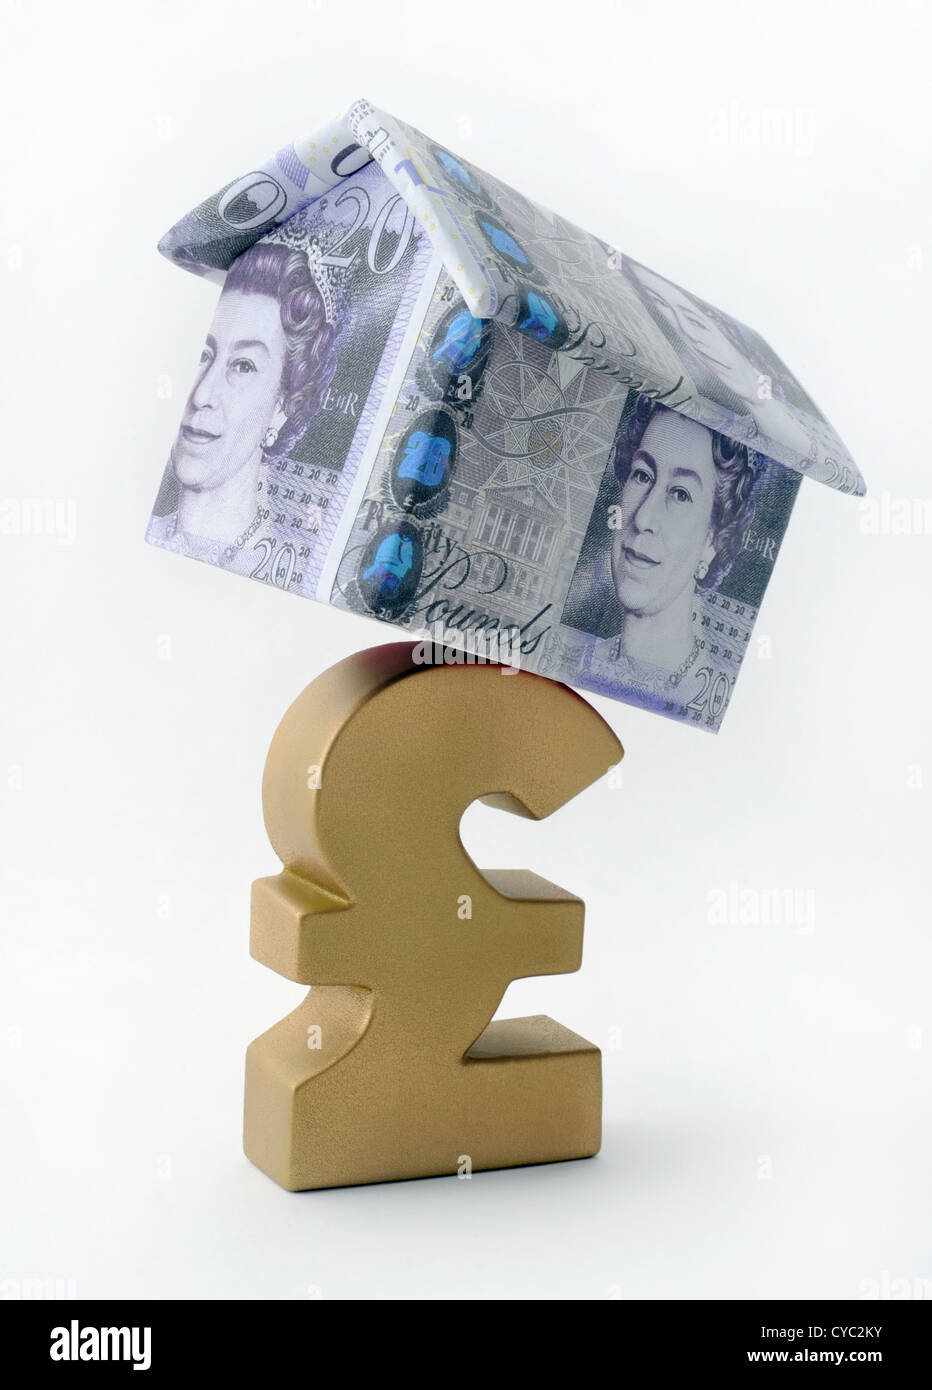 HOUSE MADE OF BRITISH CURRENCY BALANCING ON POUND SIGN RE SAVINGS MORTGAGES INCOMES WAGES THE ECONOMY RECESSION FIRST BUYERS UK Stock Photo